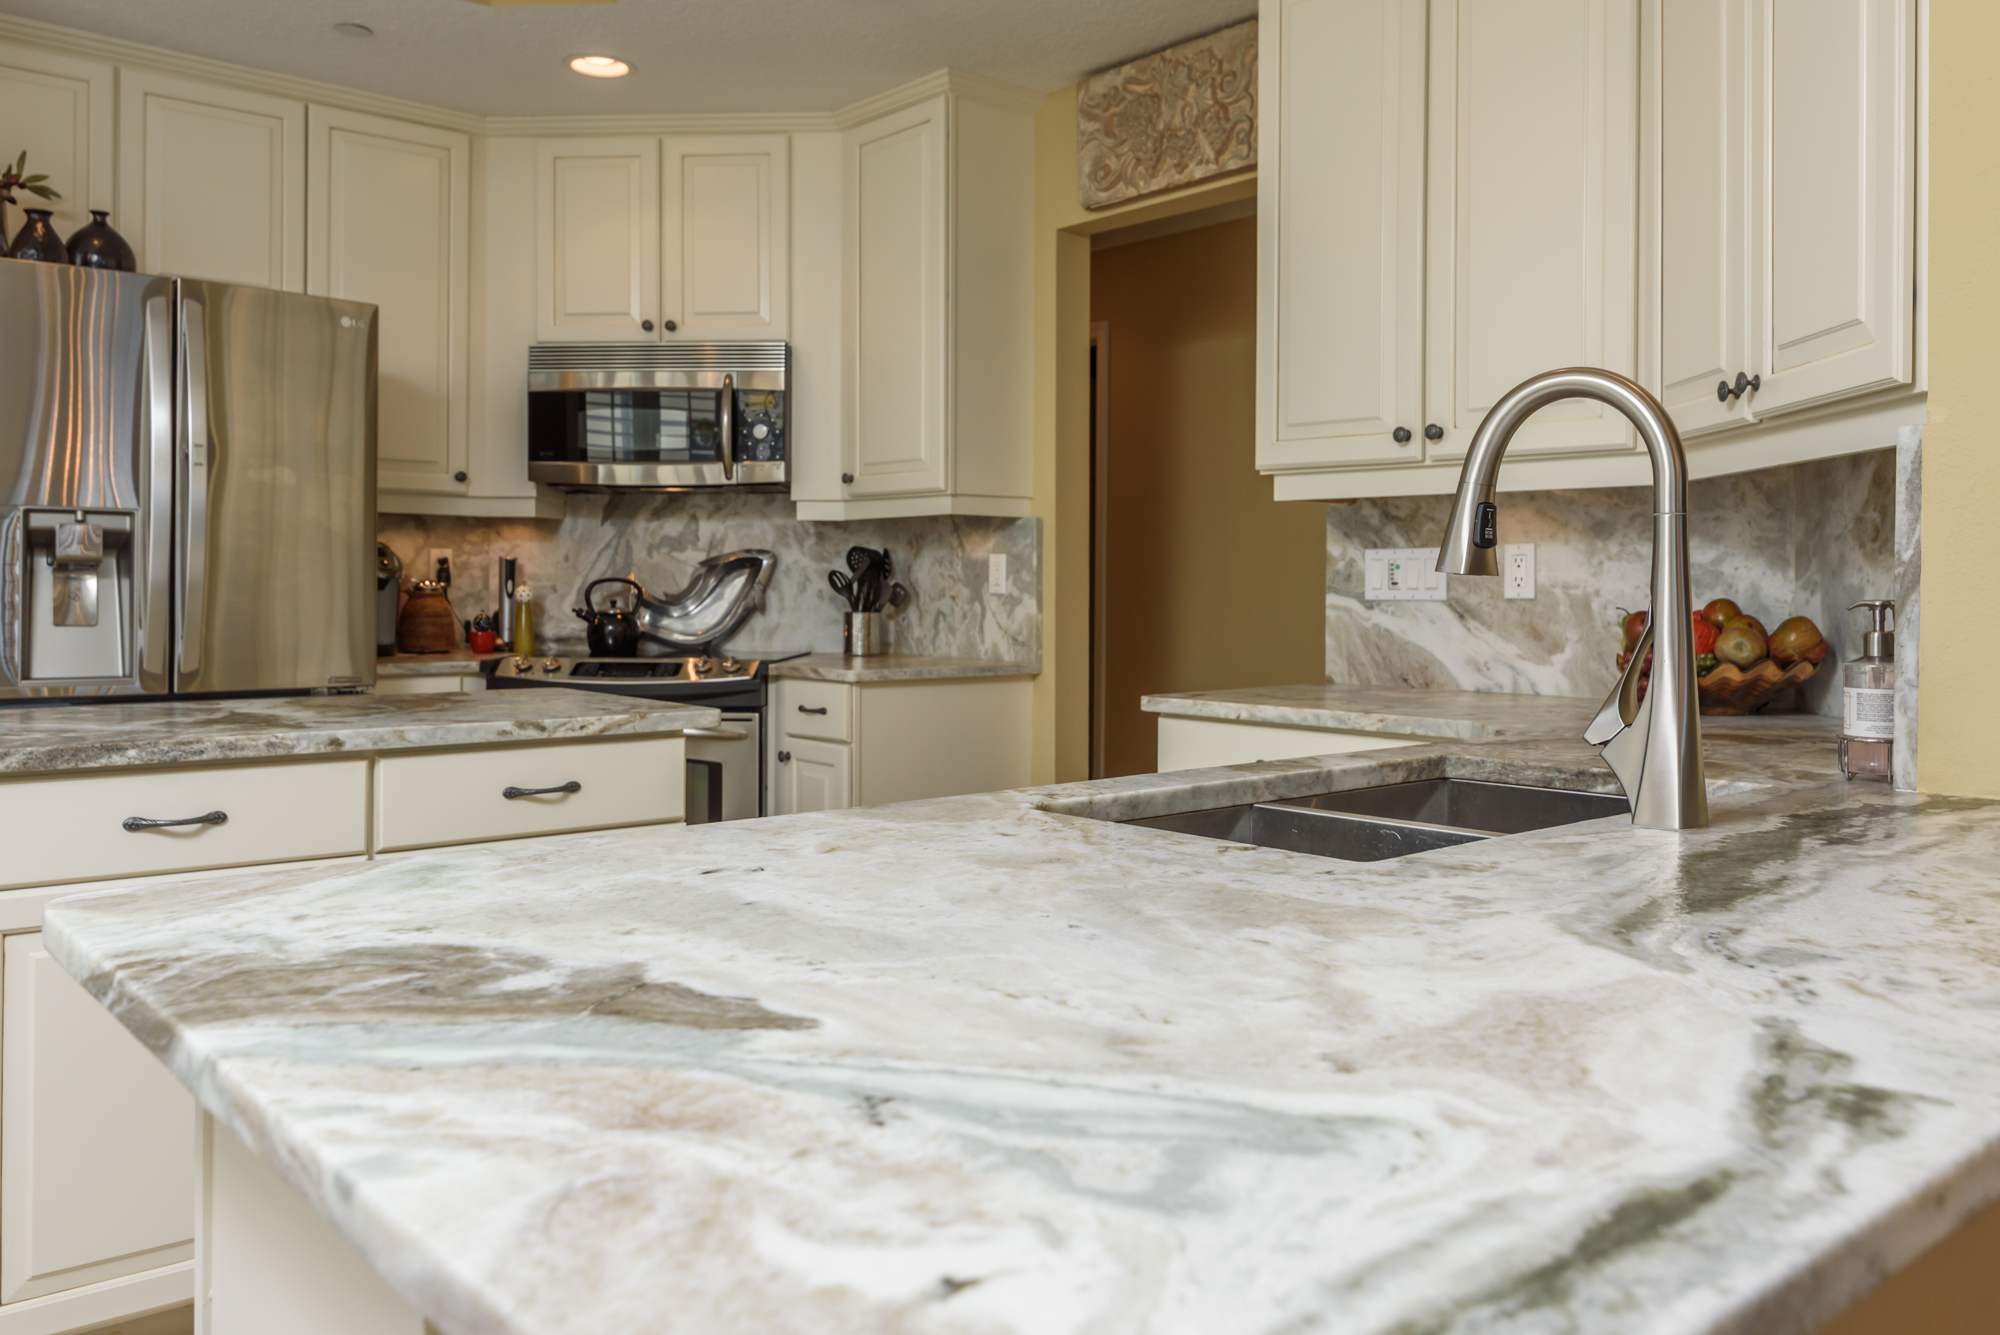 The owners renovated the kitchen when they moved in several years ago. Cabinets painted a creamy white were installed, along with stainless steel appliances. Honed granite countertops with matching backsplash complete the look.